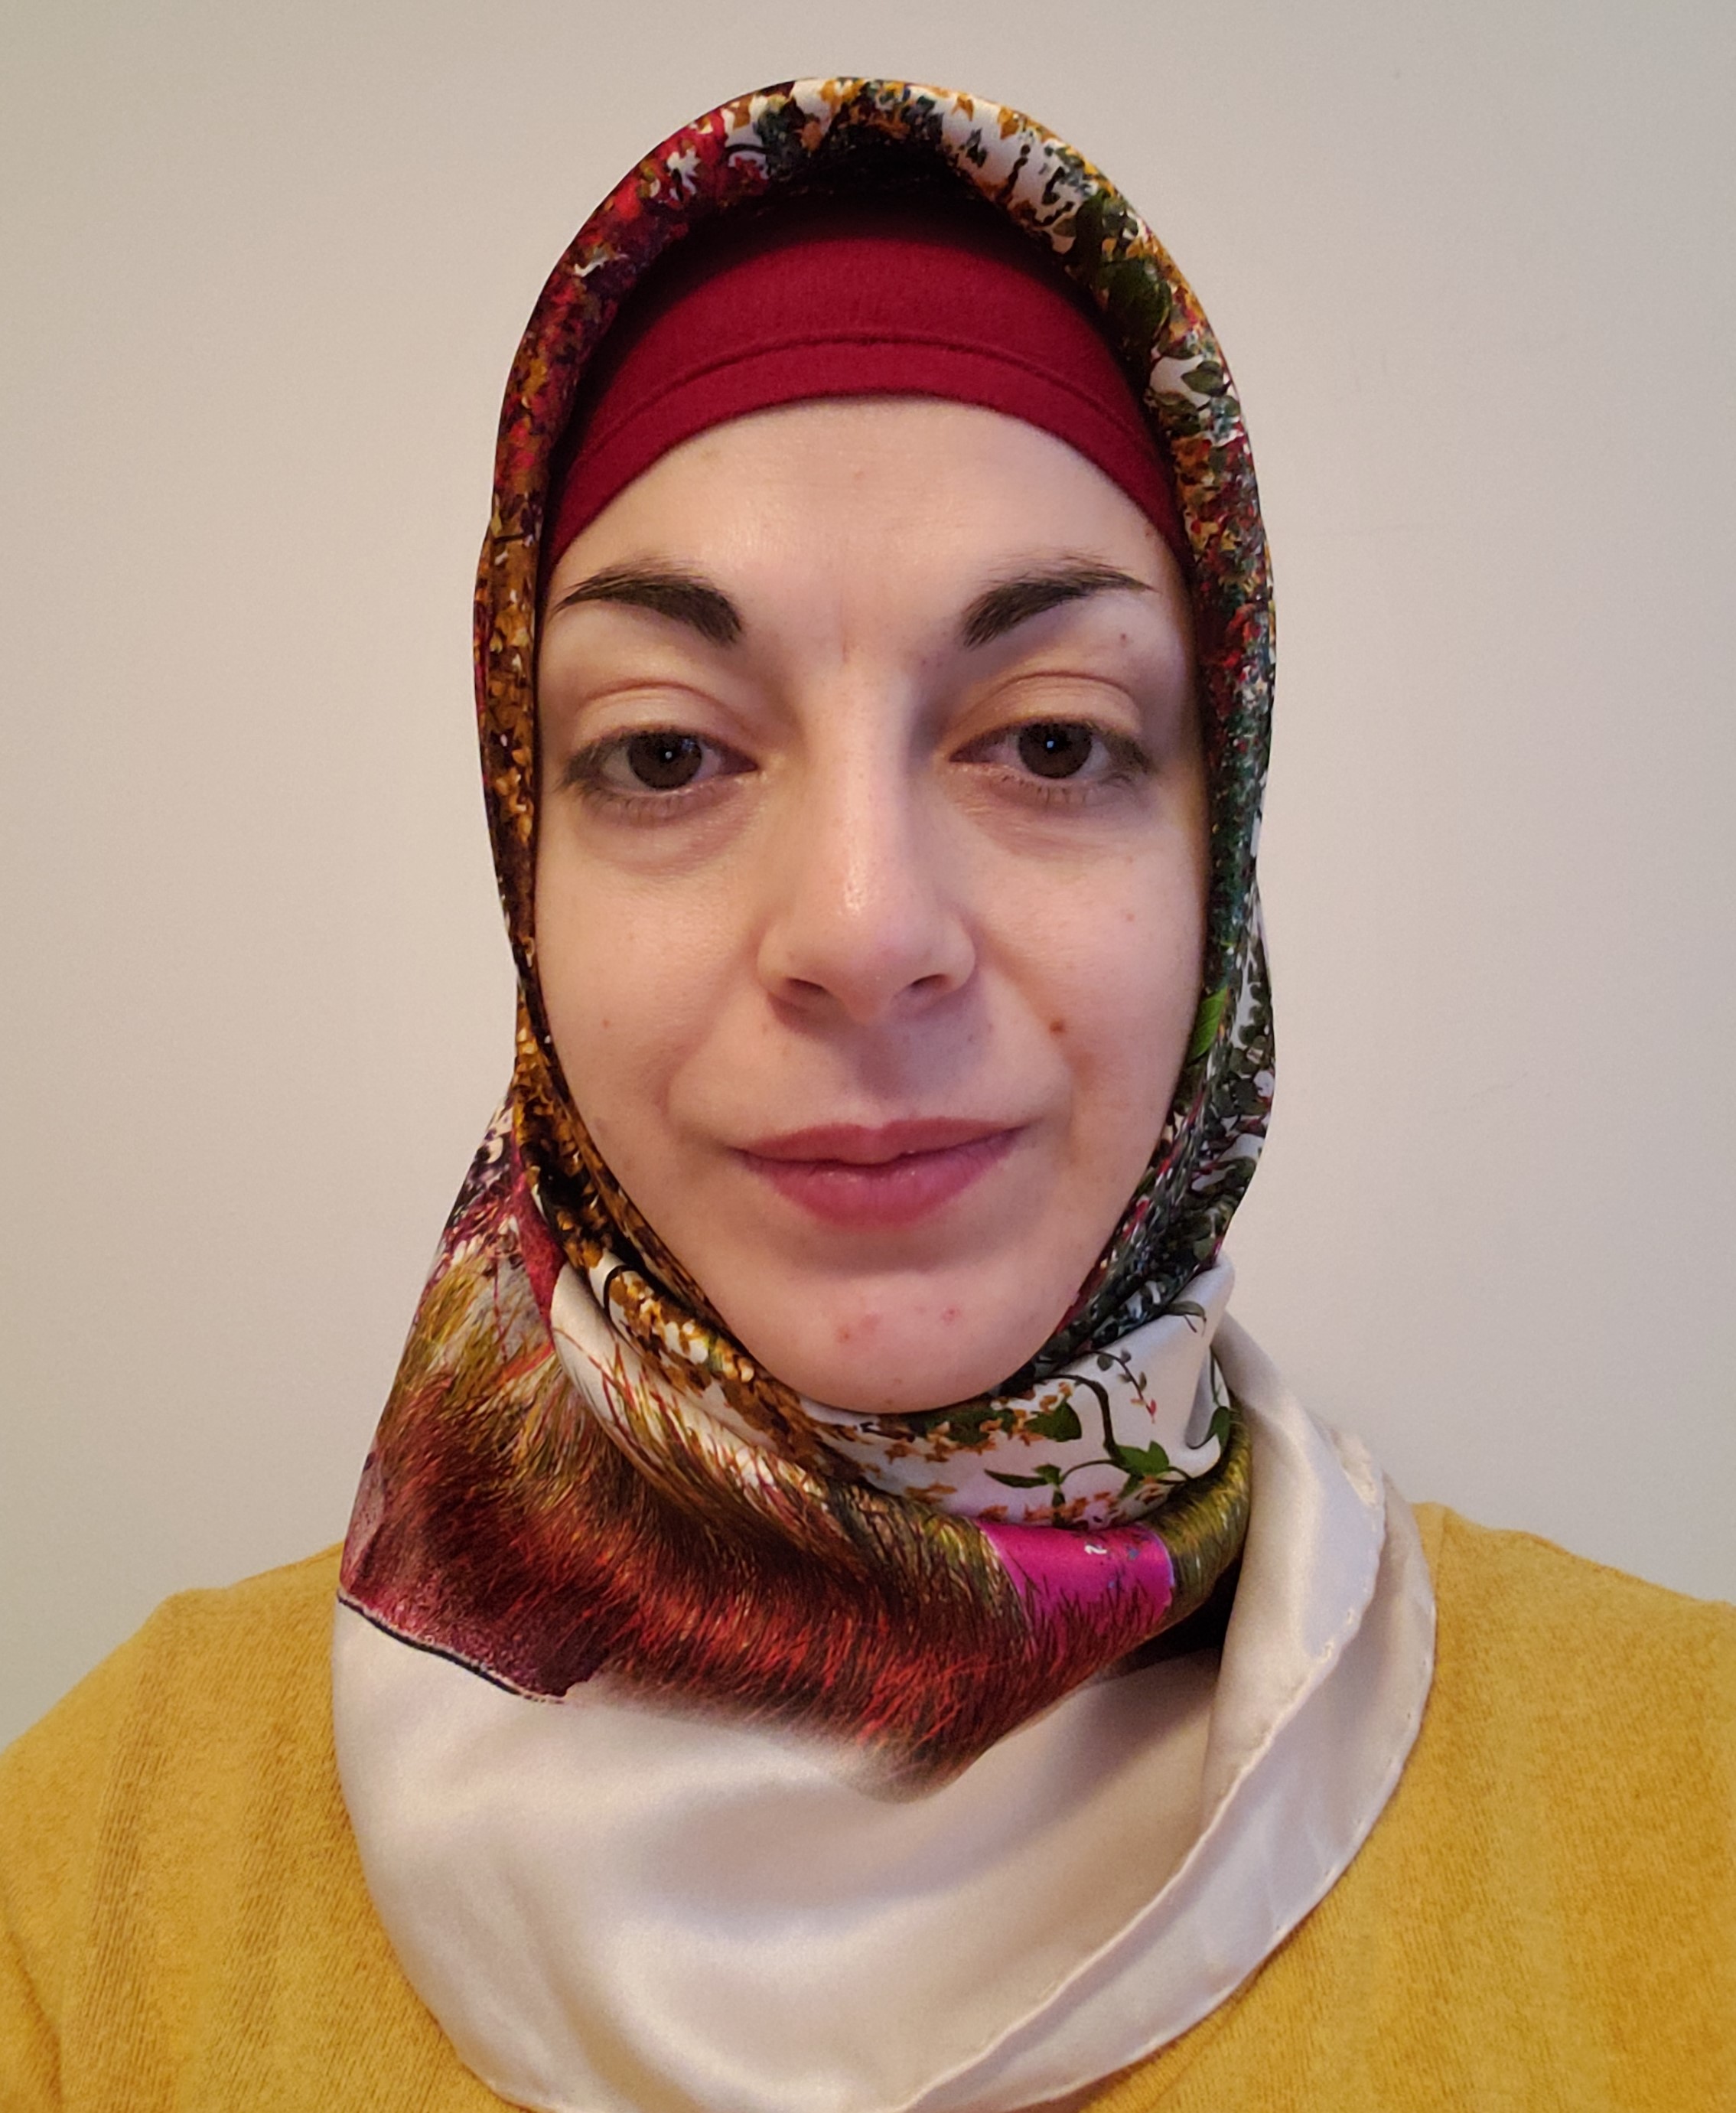 <strong><strong><strong><strong><strong>Ms. Vesile Uzun, Infant Assistant Teacher</strong></strong></strong></strong></strong>